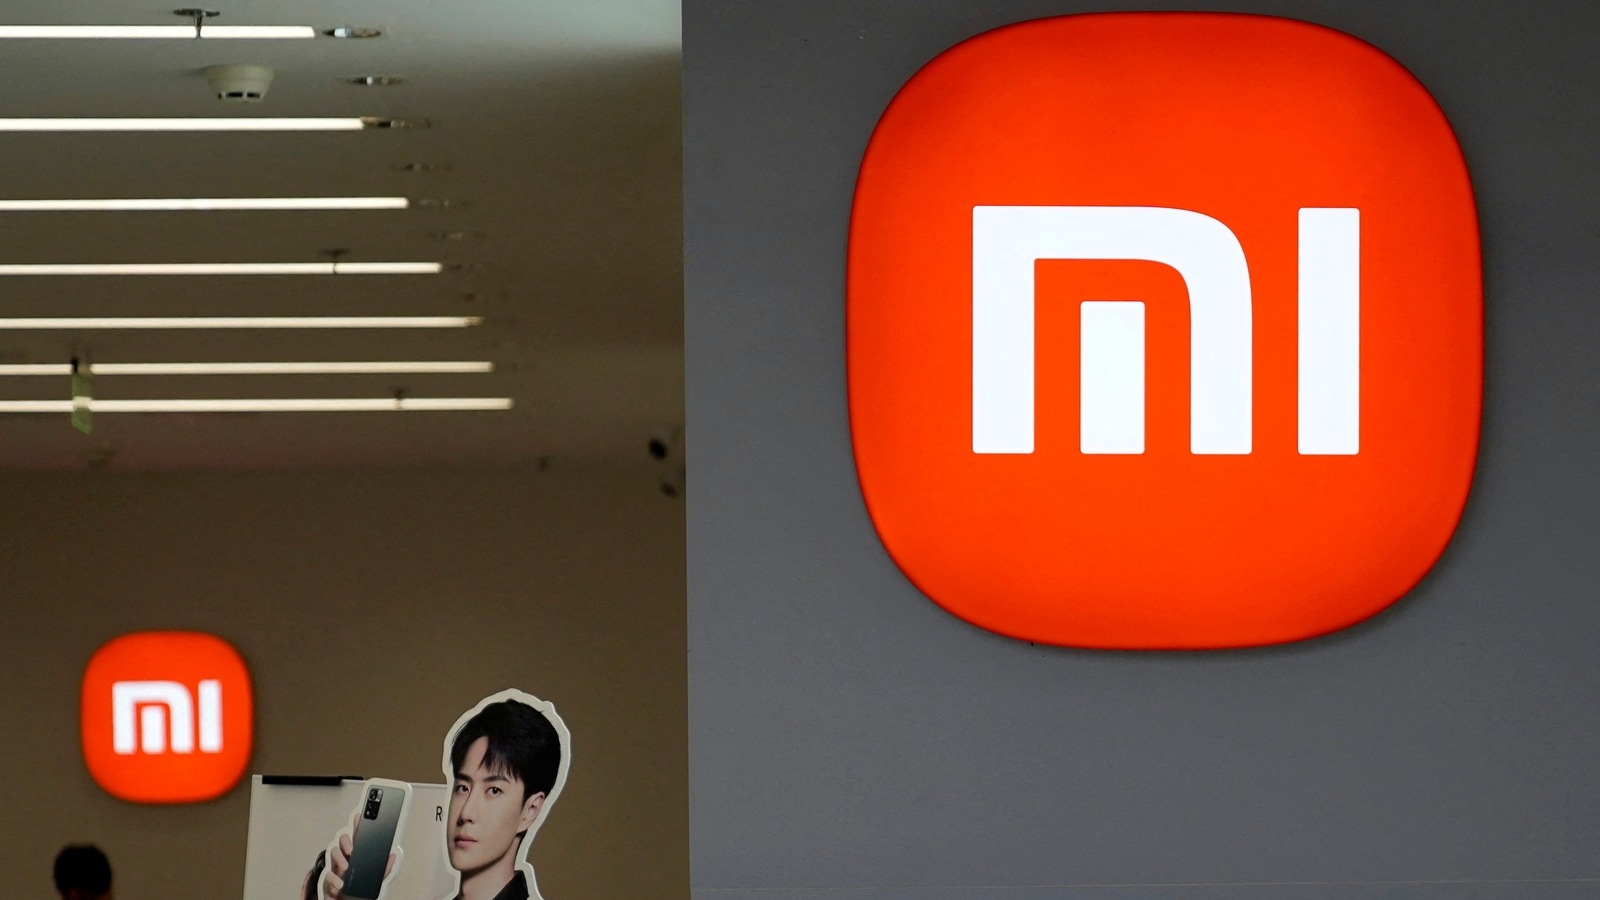 Redmi A1+ to be launched on Oct 14. Check more on ‘Made in India’ phone